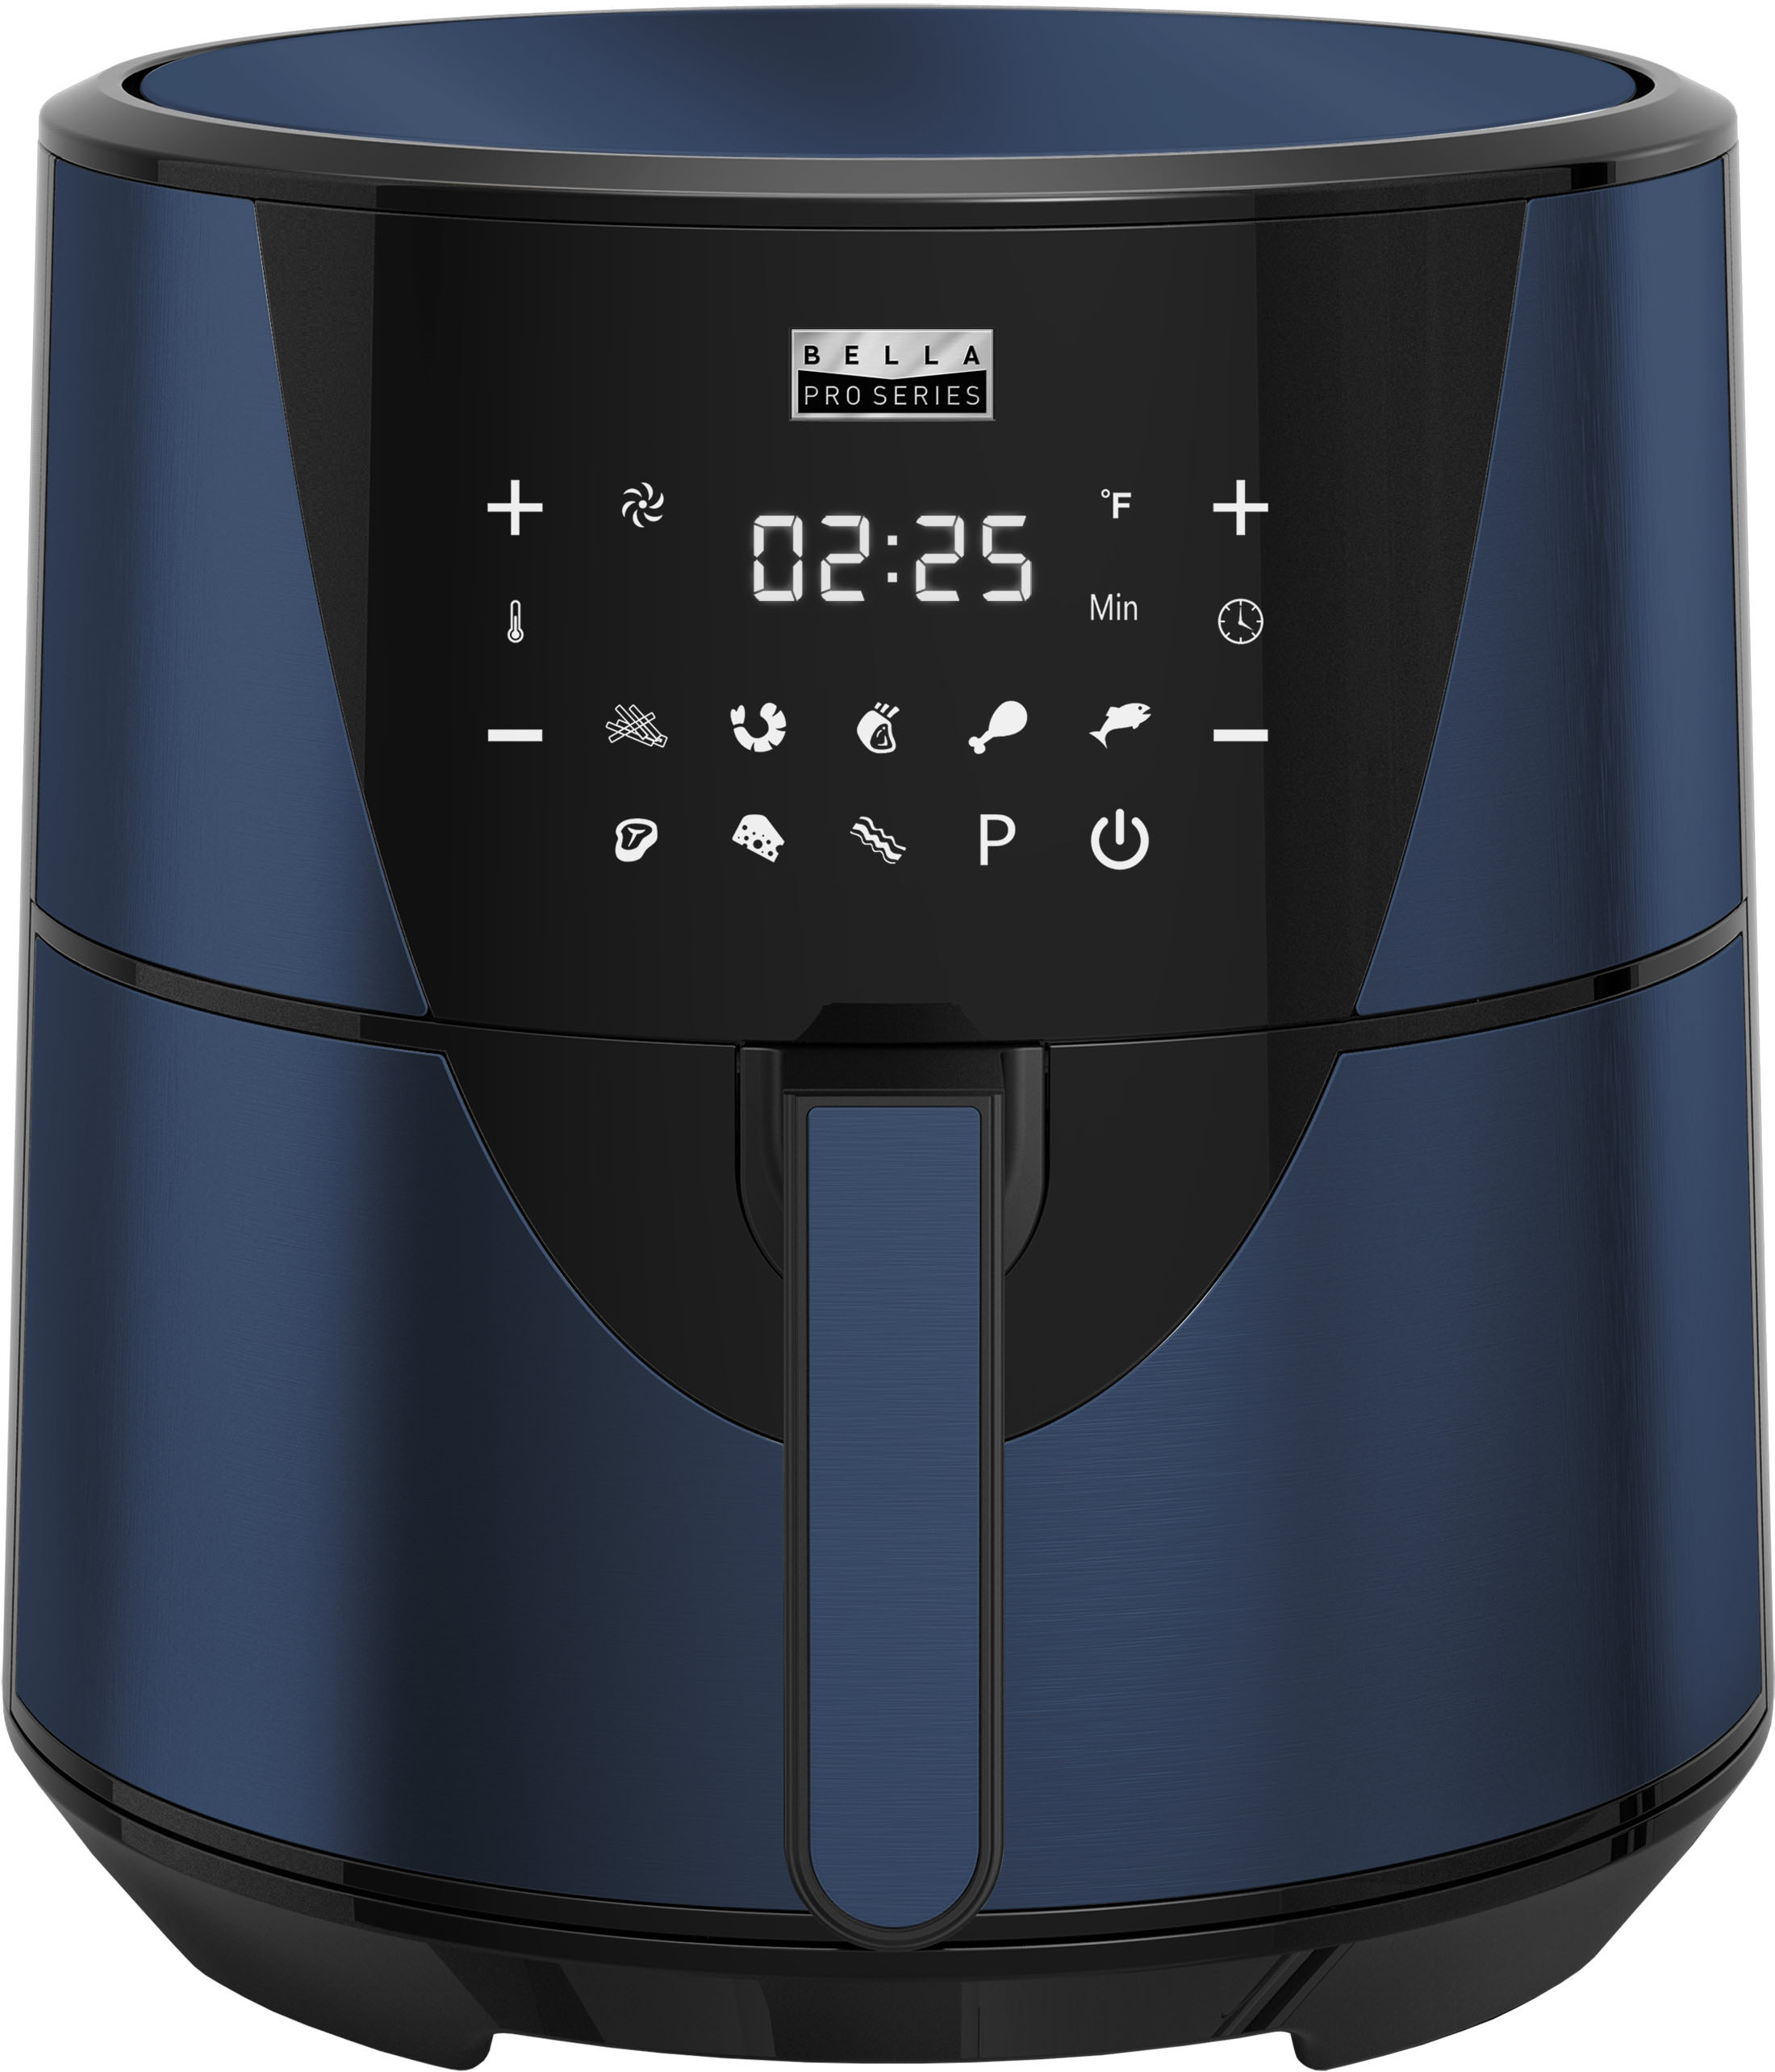 8-qt Bella Pro Series Digital Air Fryer (Ink Blue Stainless Steel) $50 + Free Shipping